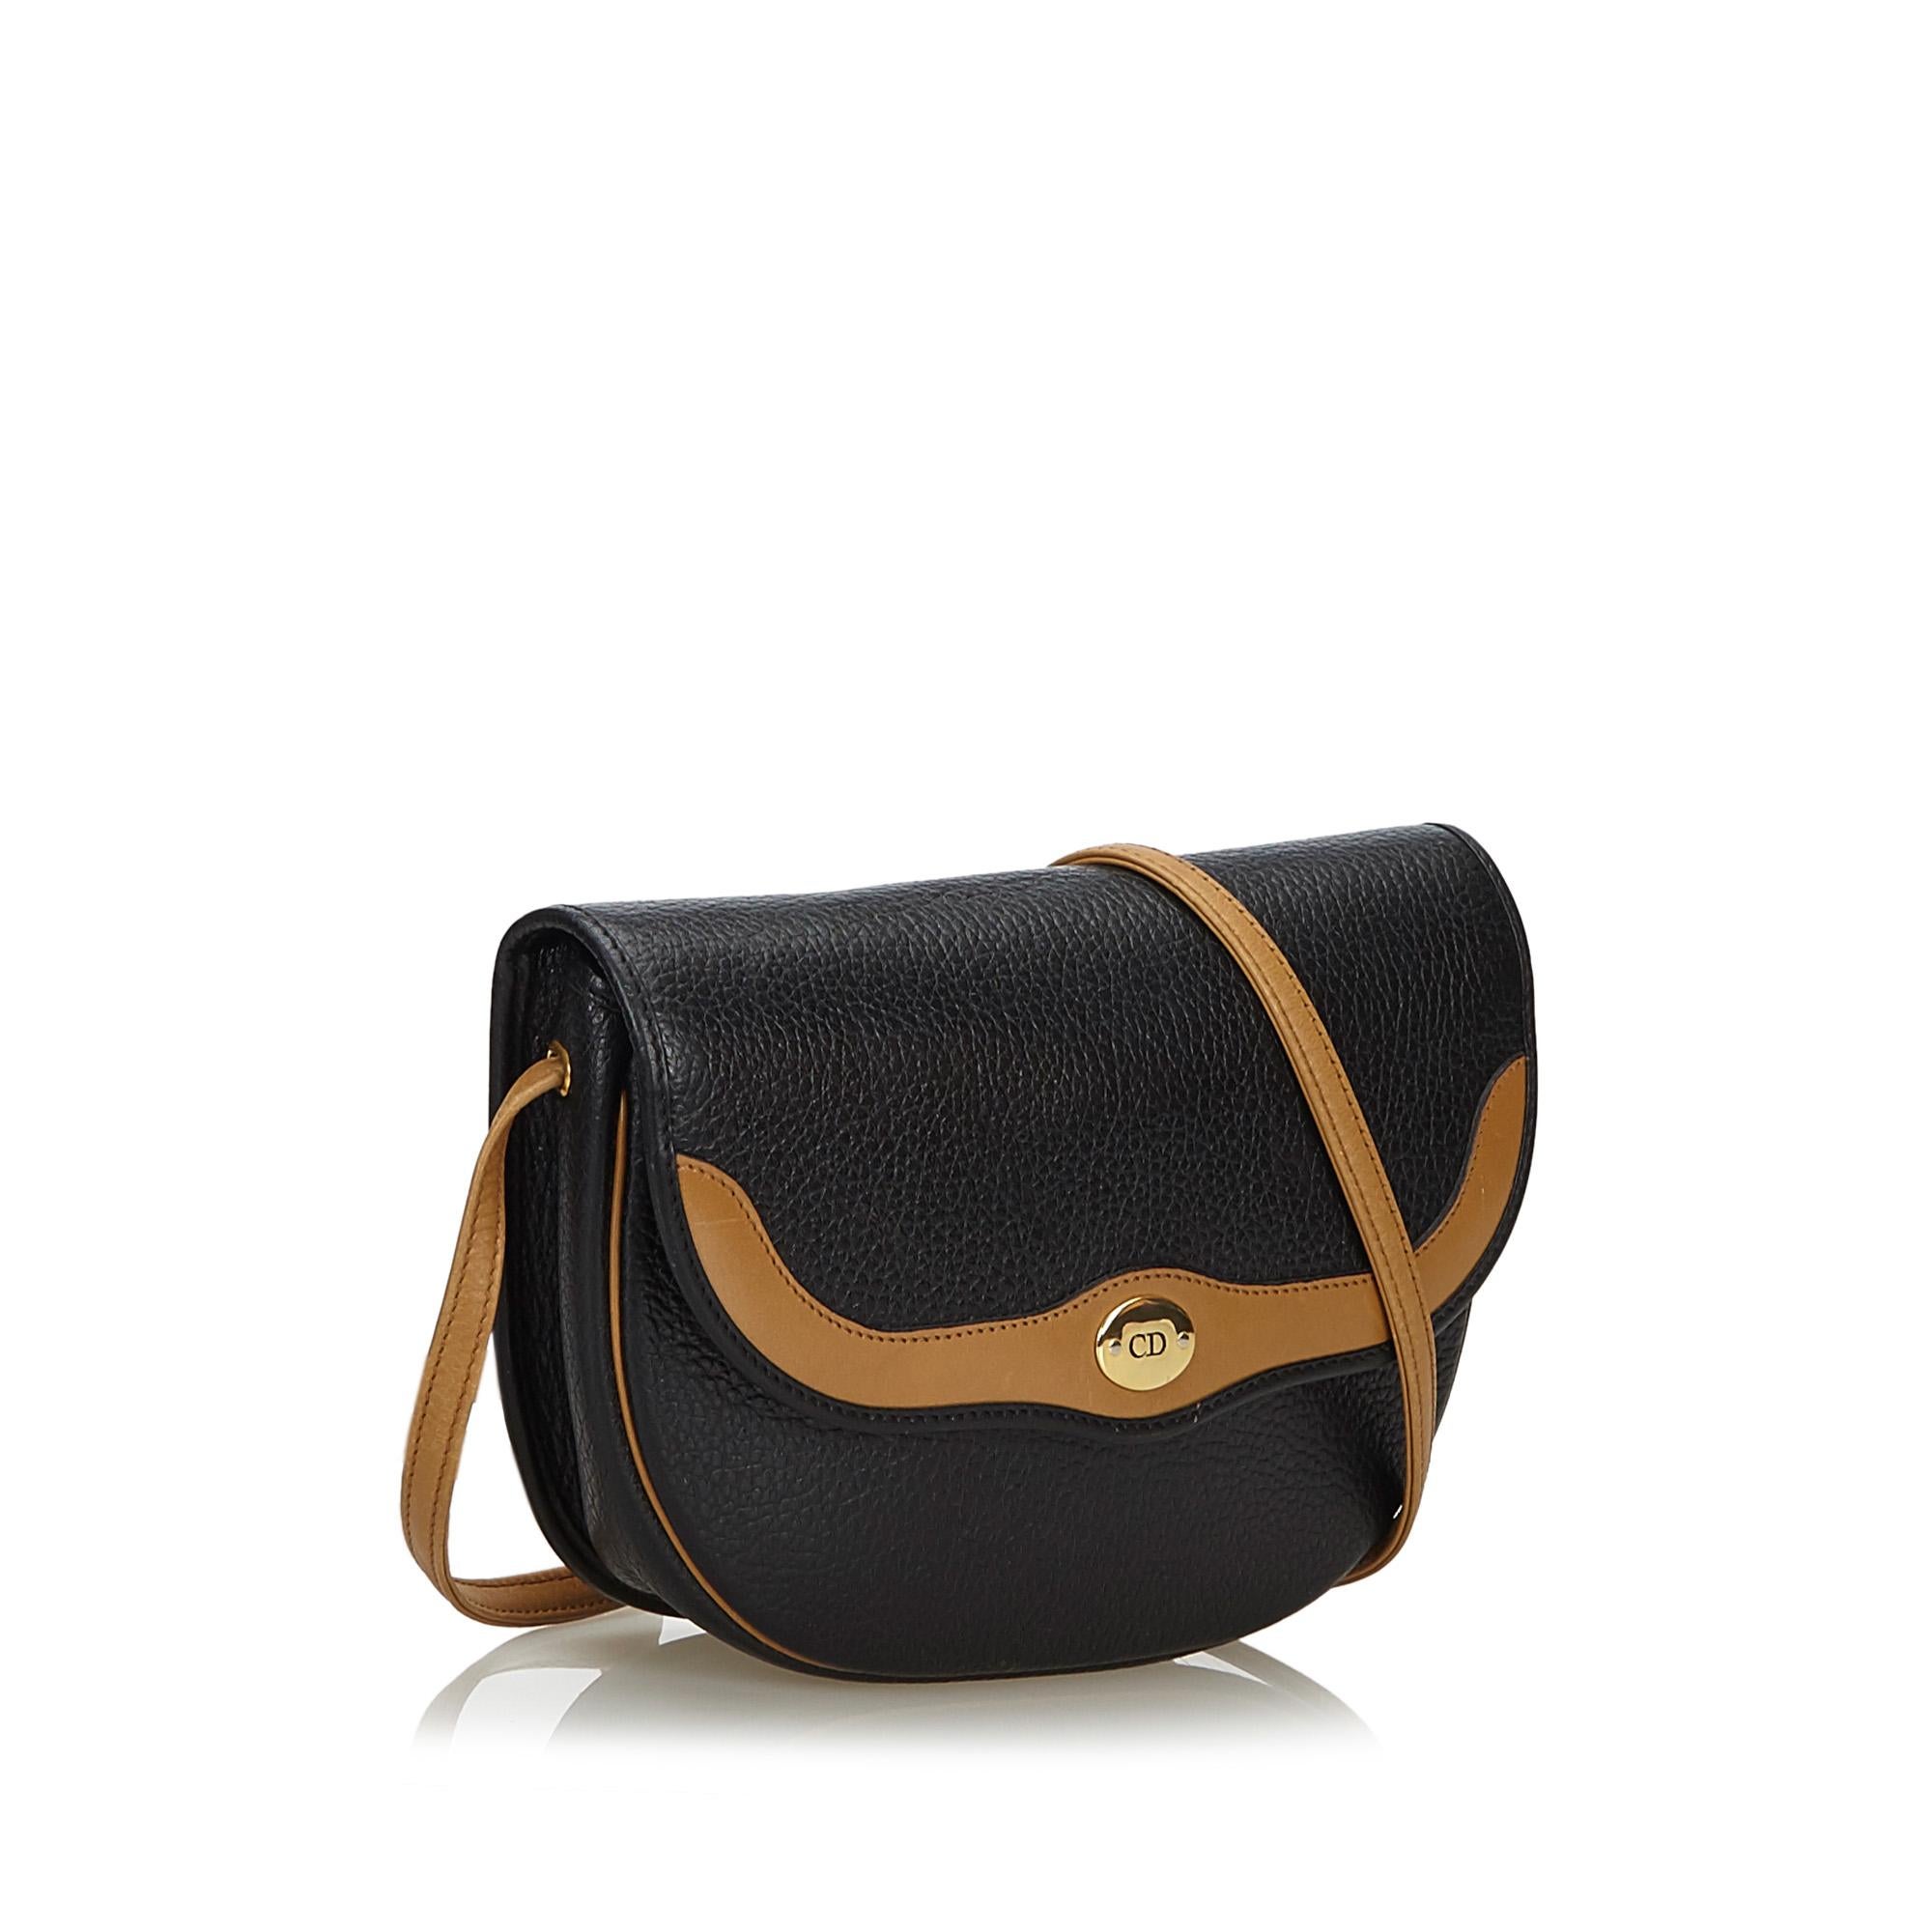 This crossbody bag features a leather body, a flat strap, a front flap with a magnetic snap button closure, and an interior zip pocket. It carries as B+ condition rating.

Inclusions: 
This item does not come with inclusions.

Dimensions:
Length: